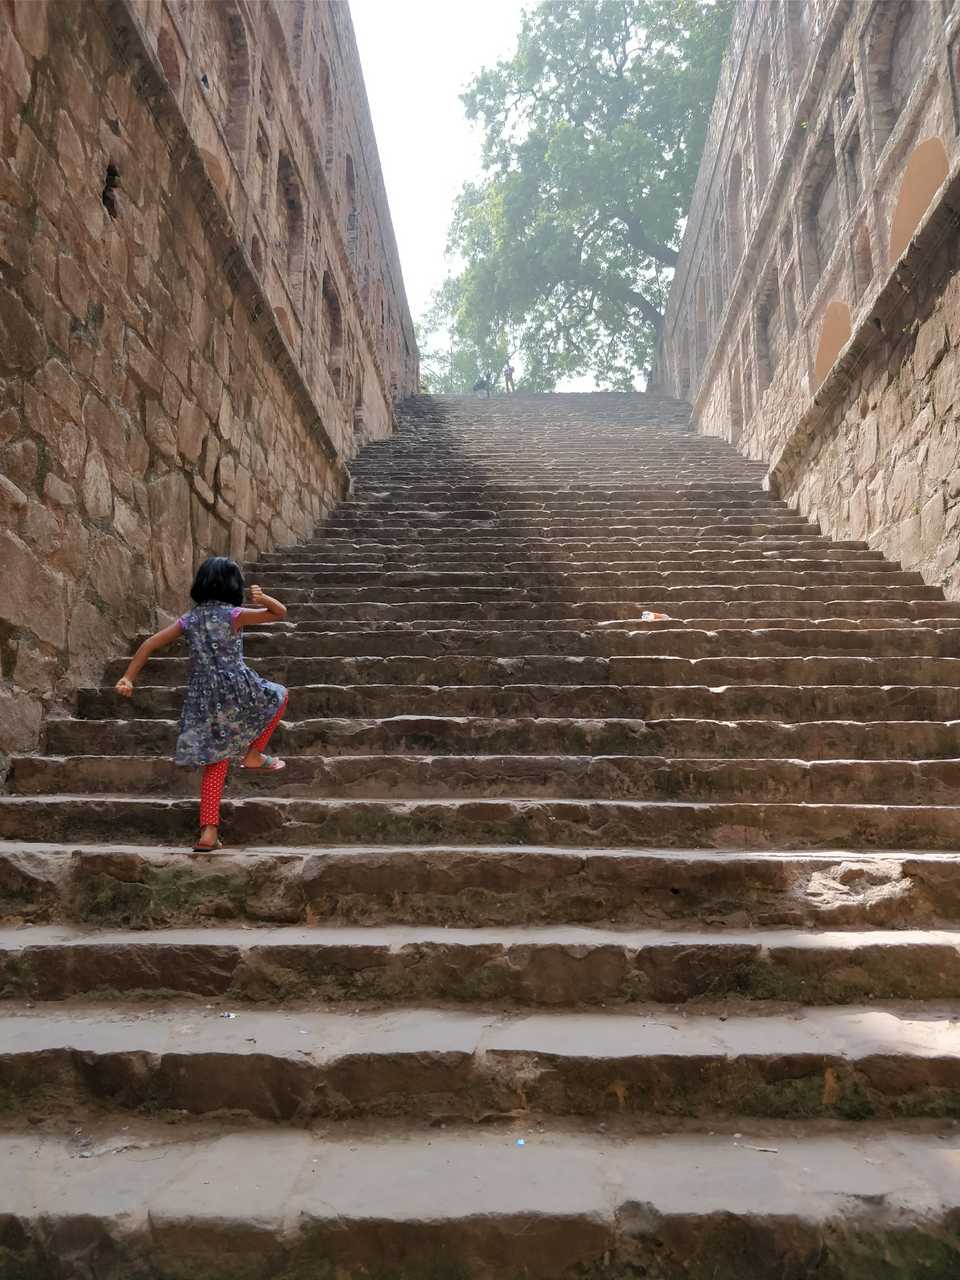 Looking up at the steps of Agrasen Ki Baoli from the bottom